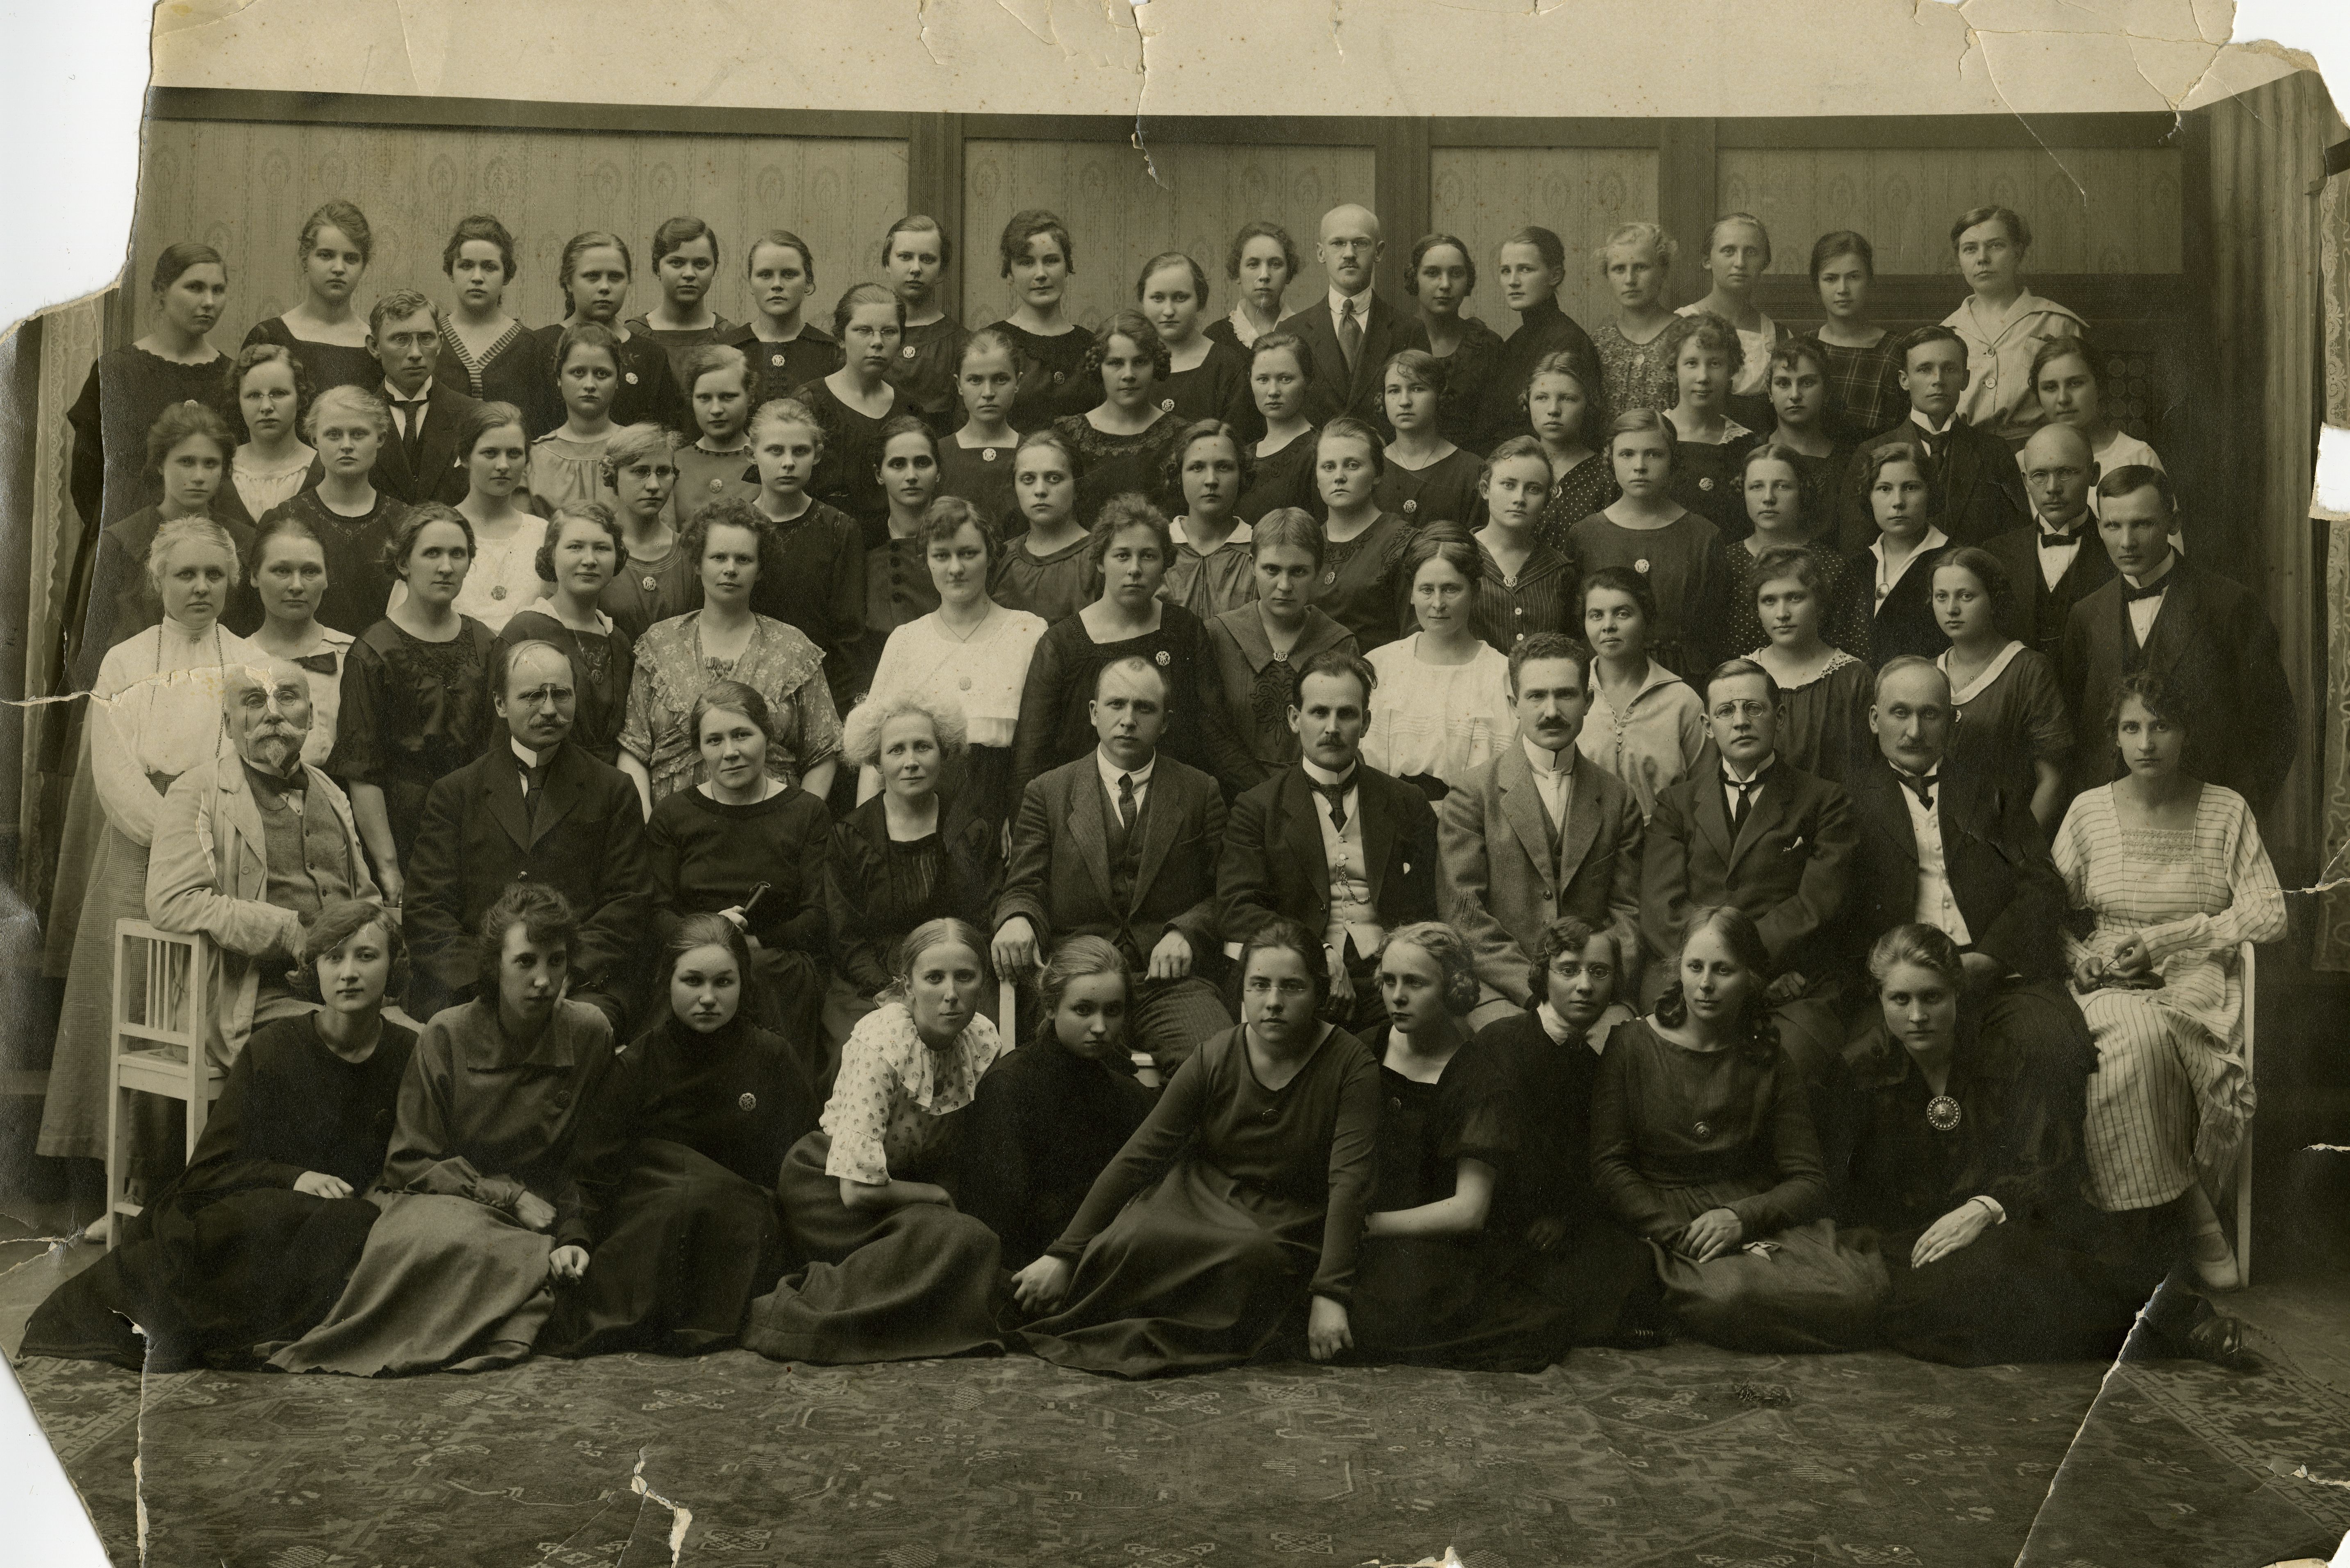 The Gümn of the daughters of the ENKS. Students and Teachers [1917-1918]